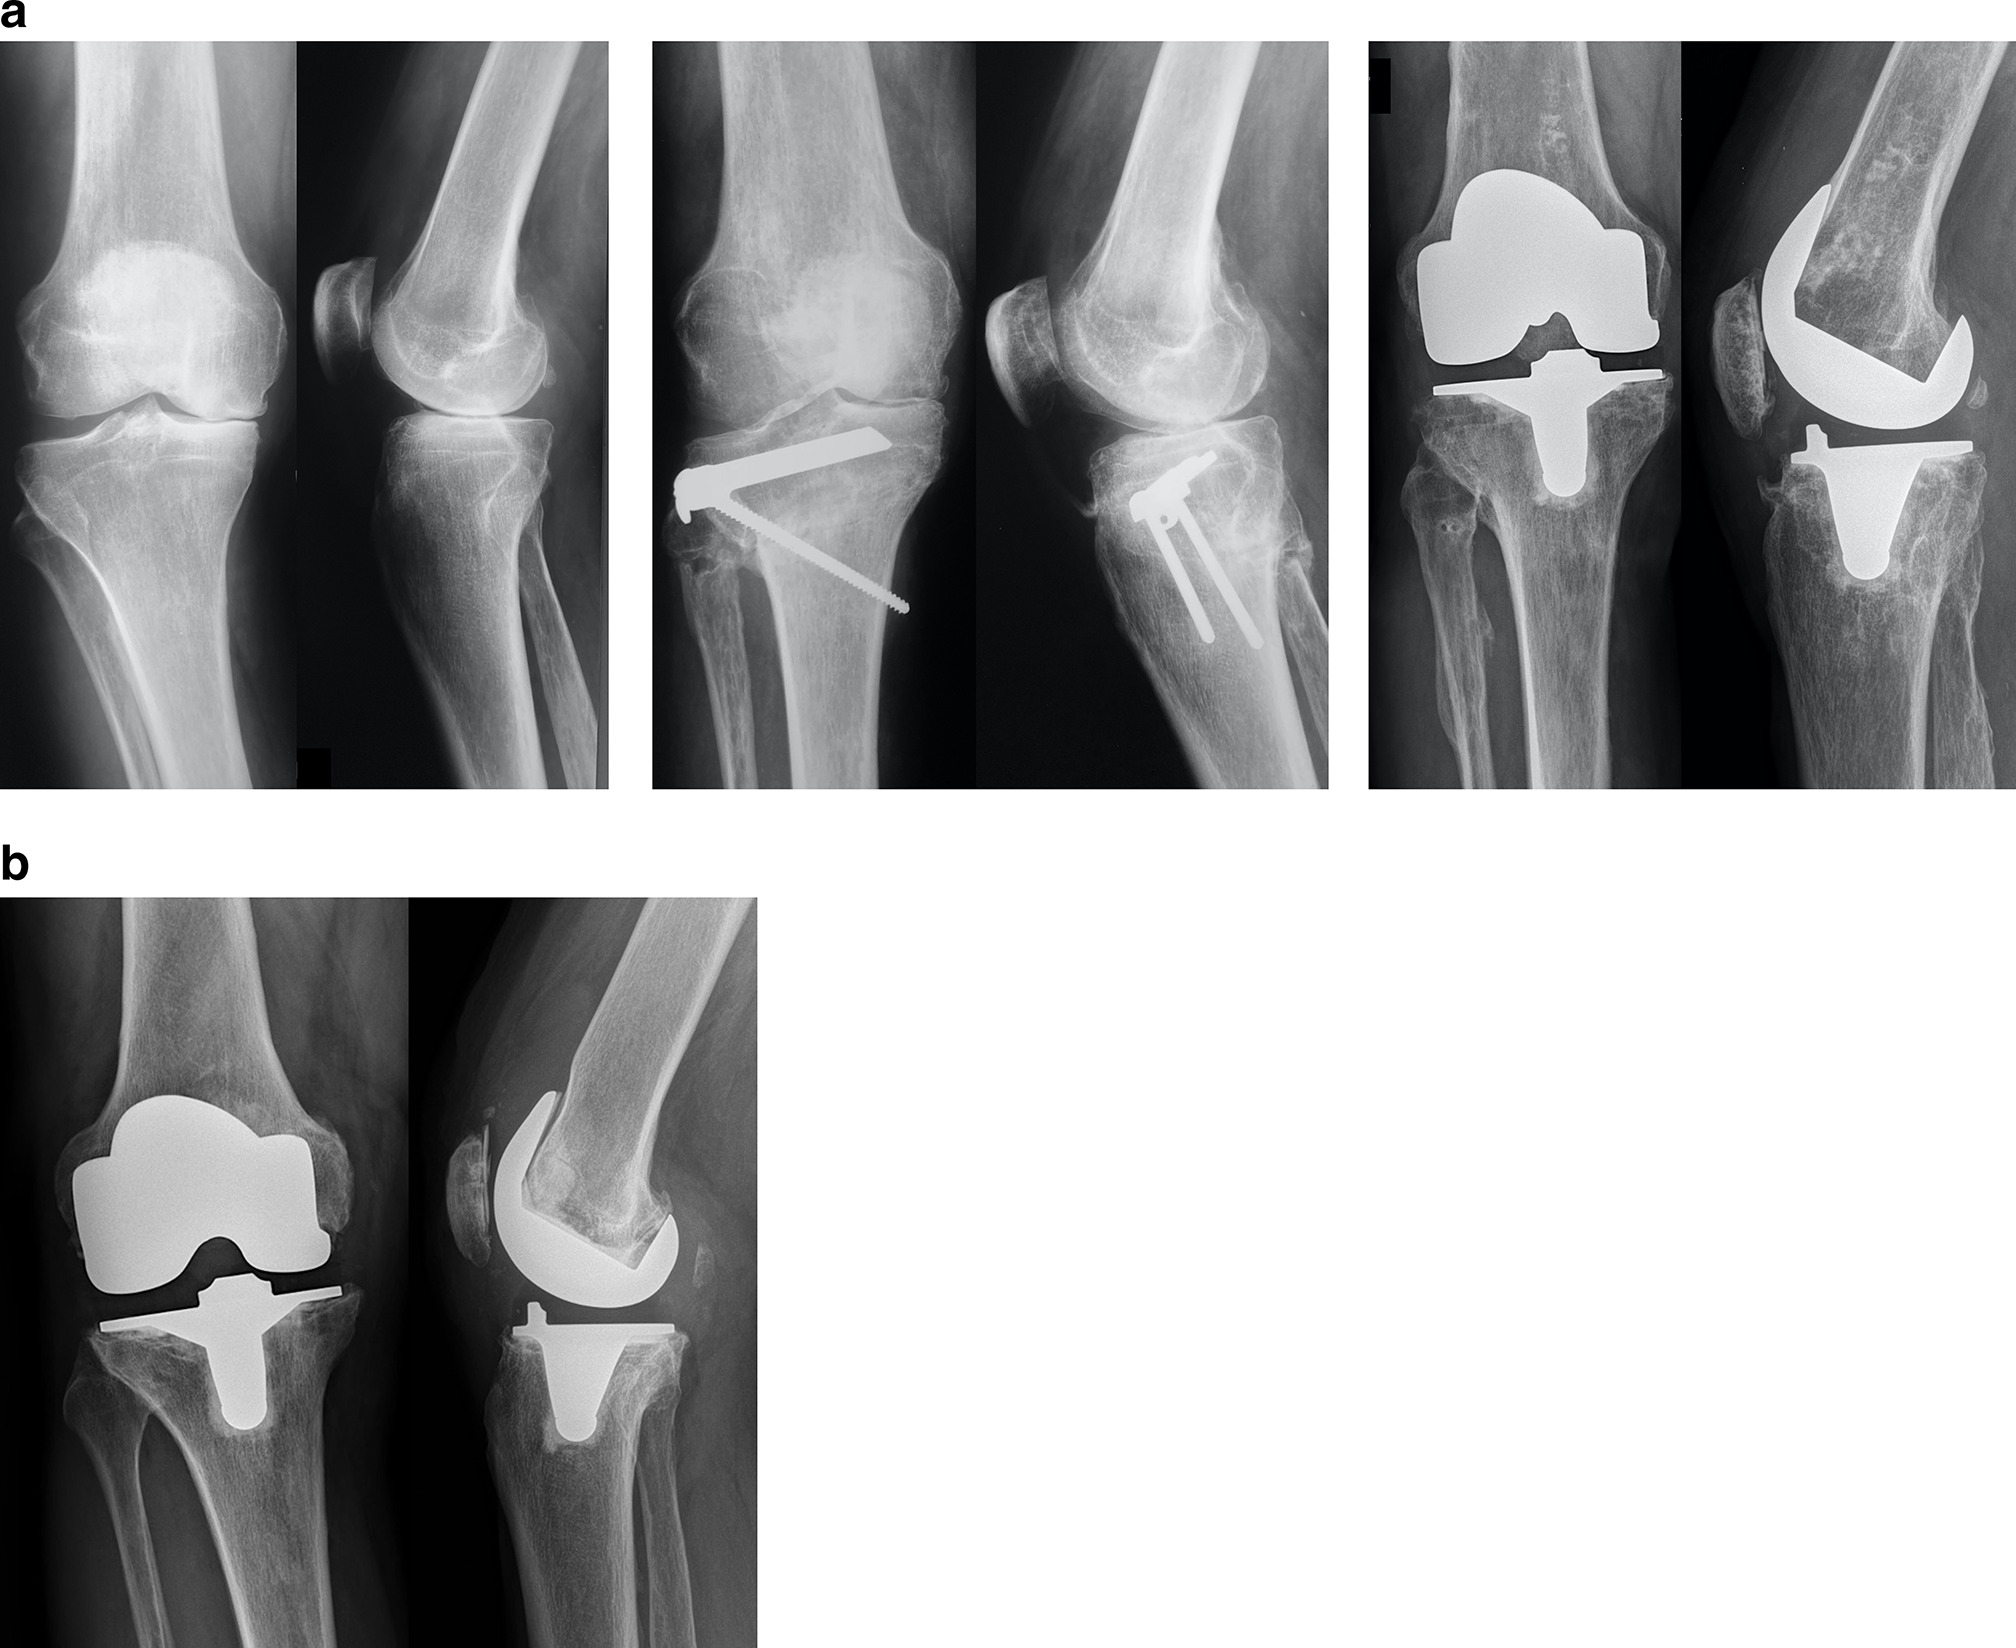 Fig. 3 
            a) Radiographs of a left knee (male, 52 years old) showing monocompartmental osteoarthritis (OA) before high tibial osteotomy (HTO), at eight years after HTO followed by total knee arthroplasty (TKA) at 18 years of follow-up, with good clinical outcomes. b) Radiographs of a right knee showing TKA with symptomatic tibial and femoral aseptic loosening at 12 years of follow-up in a young patient (male, 56 years old at the time of TKA implantation).
          